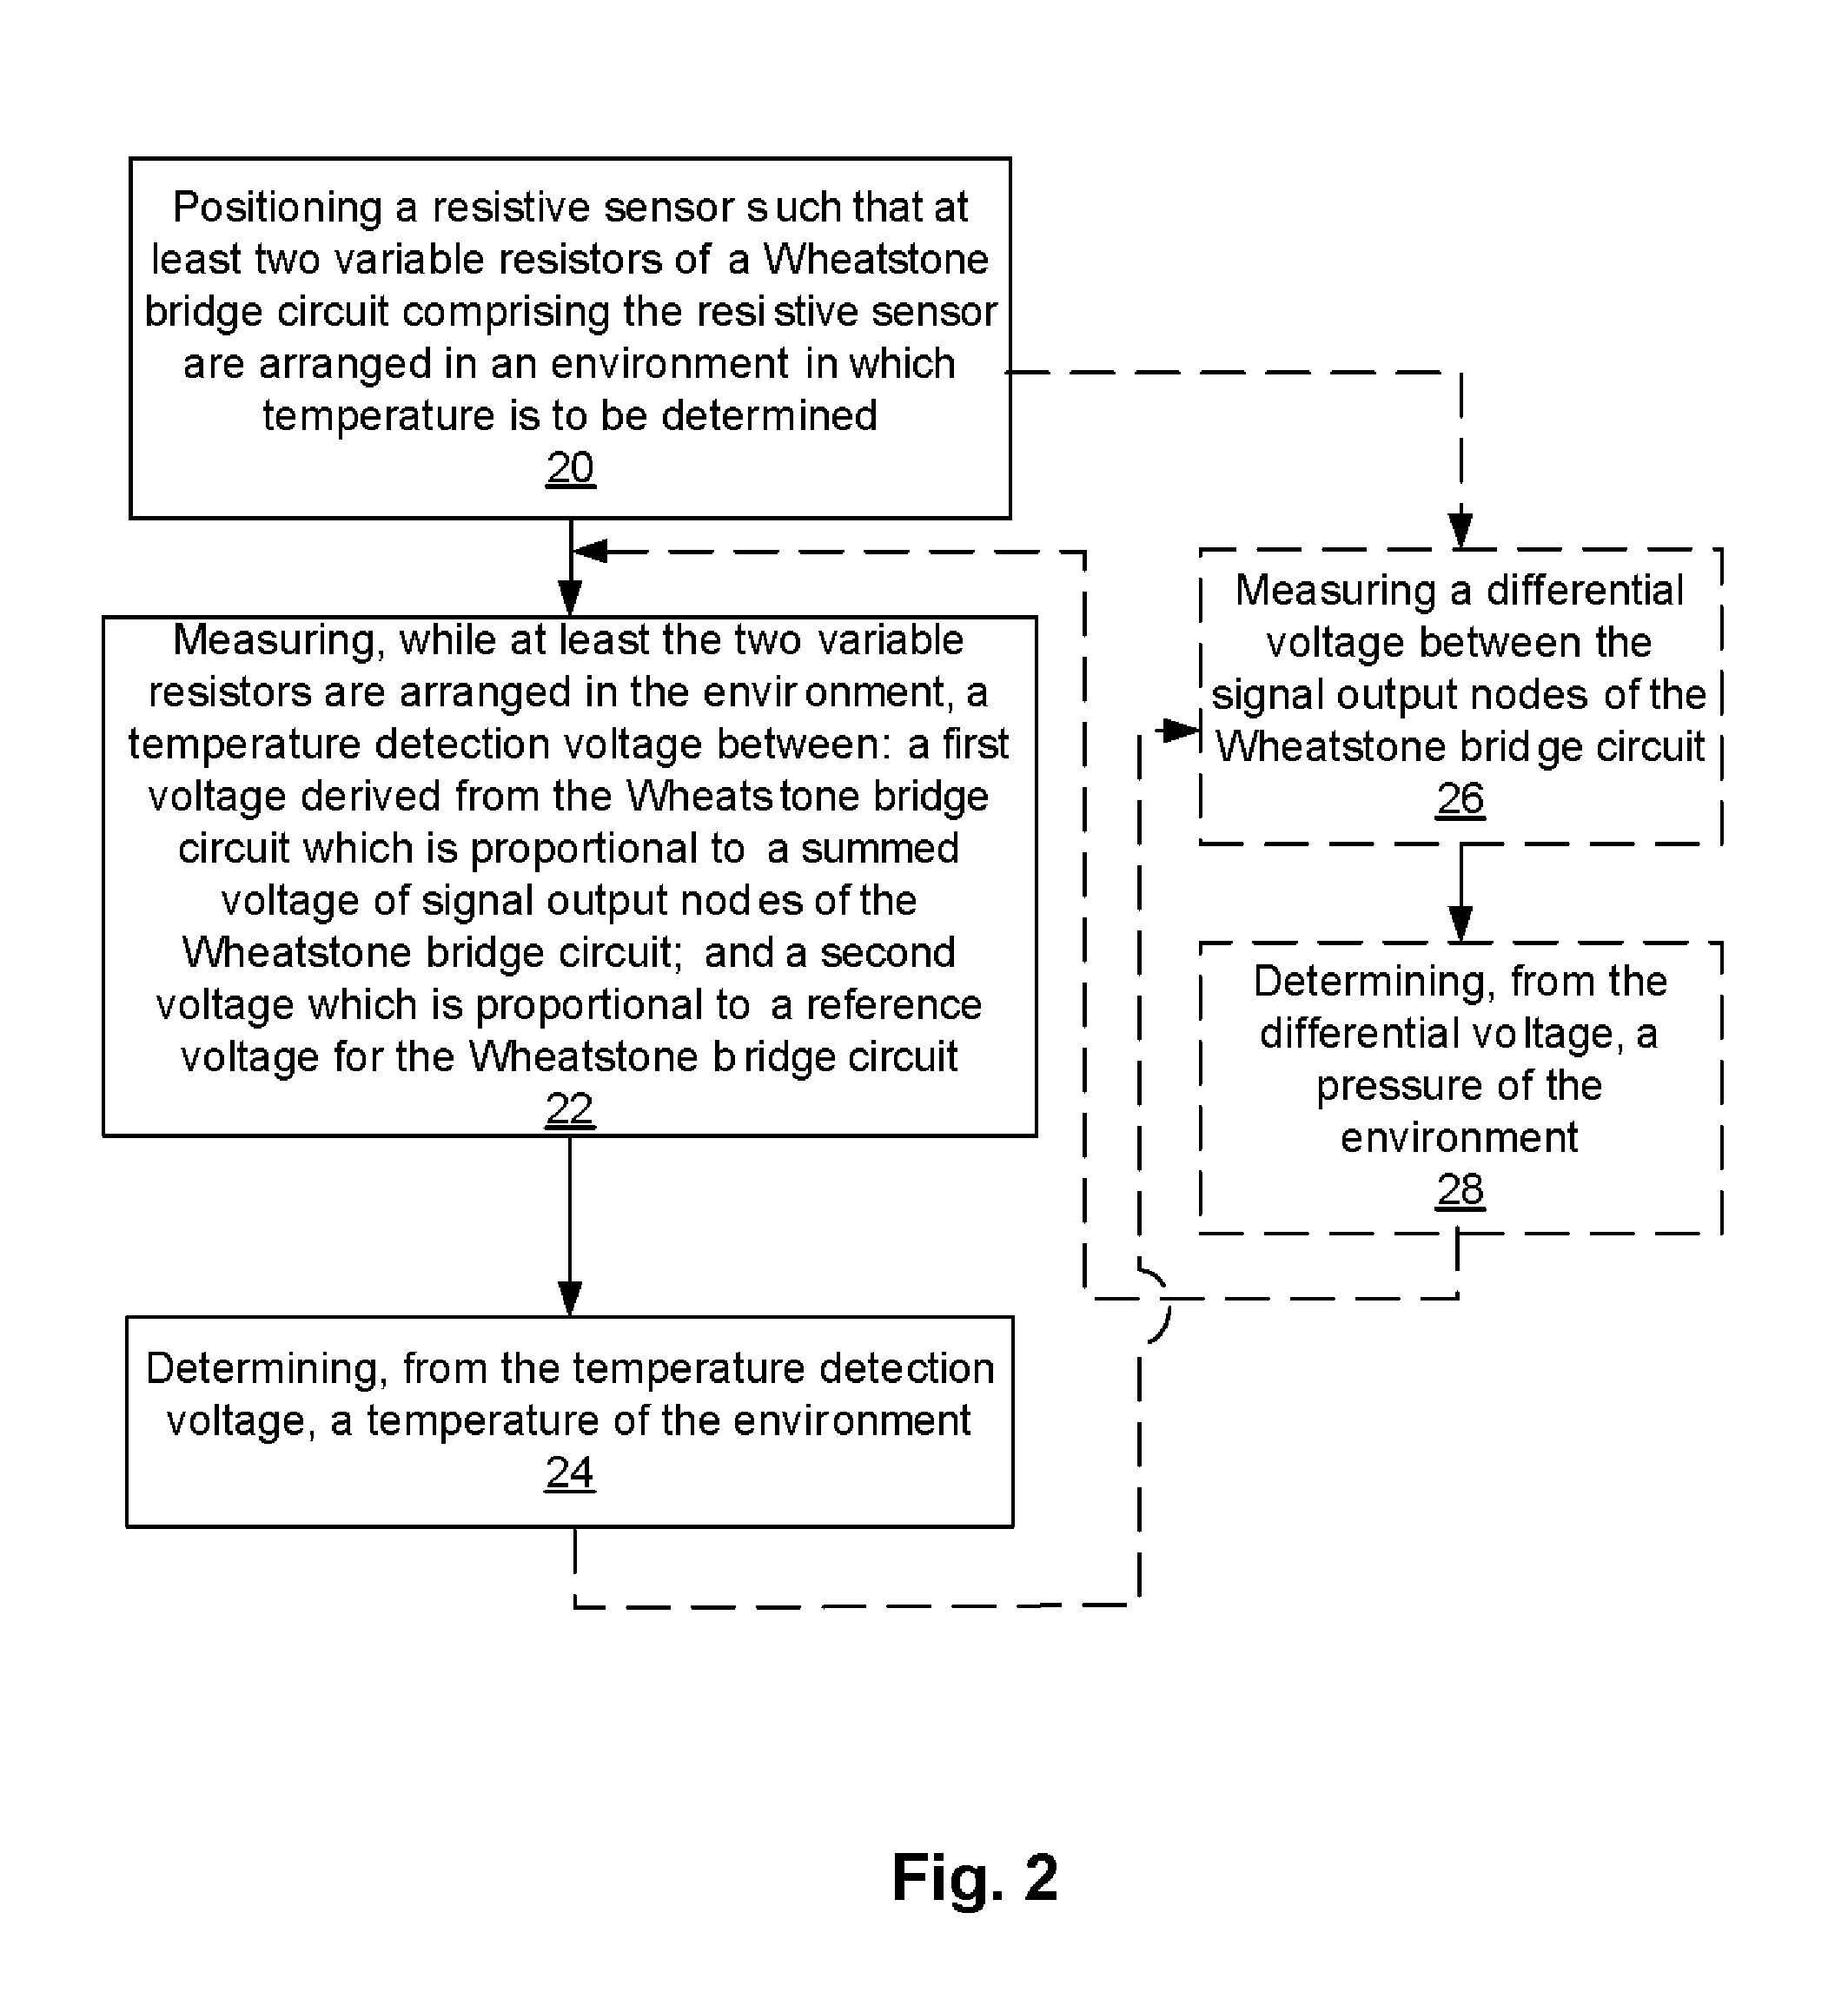 Methods, Devices, and Systems Which Determine a Parameter Value of an Object or an Environment From a Voltage Reading Associated With a Common Mode Signal of a Balanced Circuit